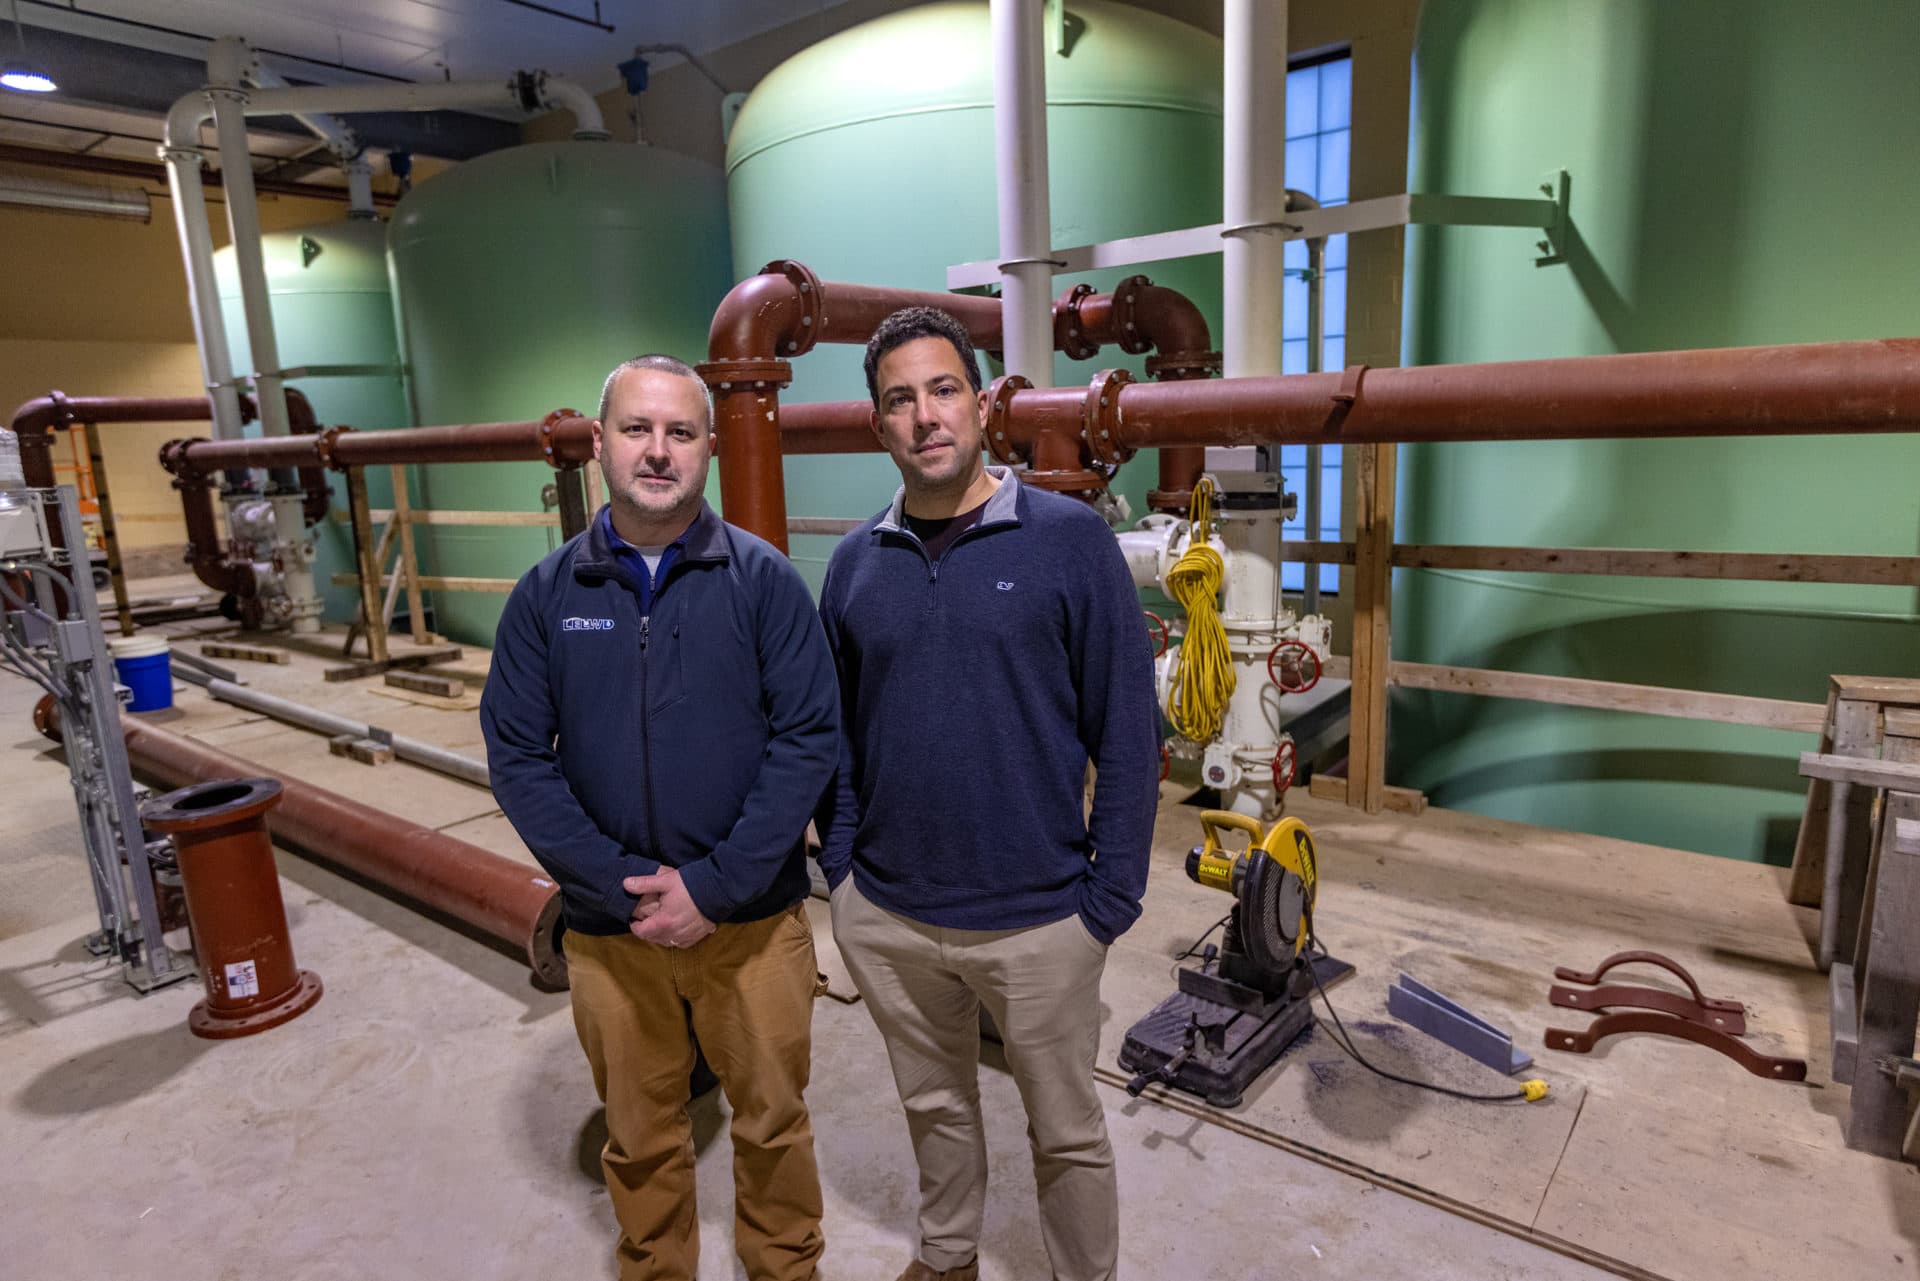 Littleton Electric Light and Water Department Water &amp; Sewer Superintendent Corey Godfrey and general manager Nick Lawler, standing in the new water treatment facility in front of the water filtering tanks. (Jesse Costa/WBUR)